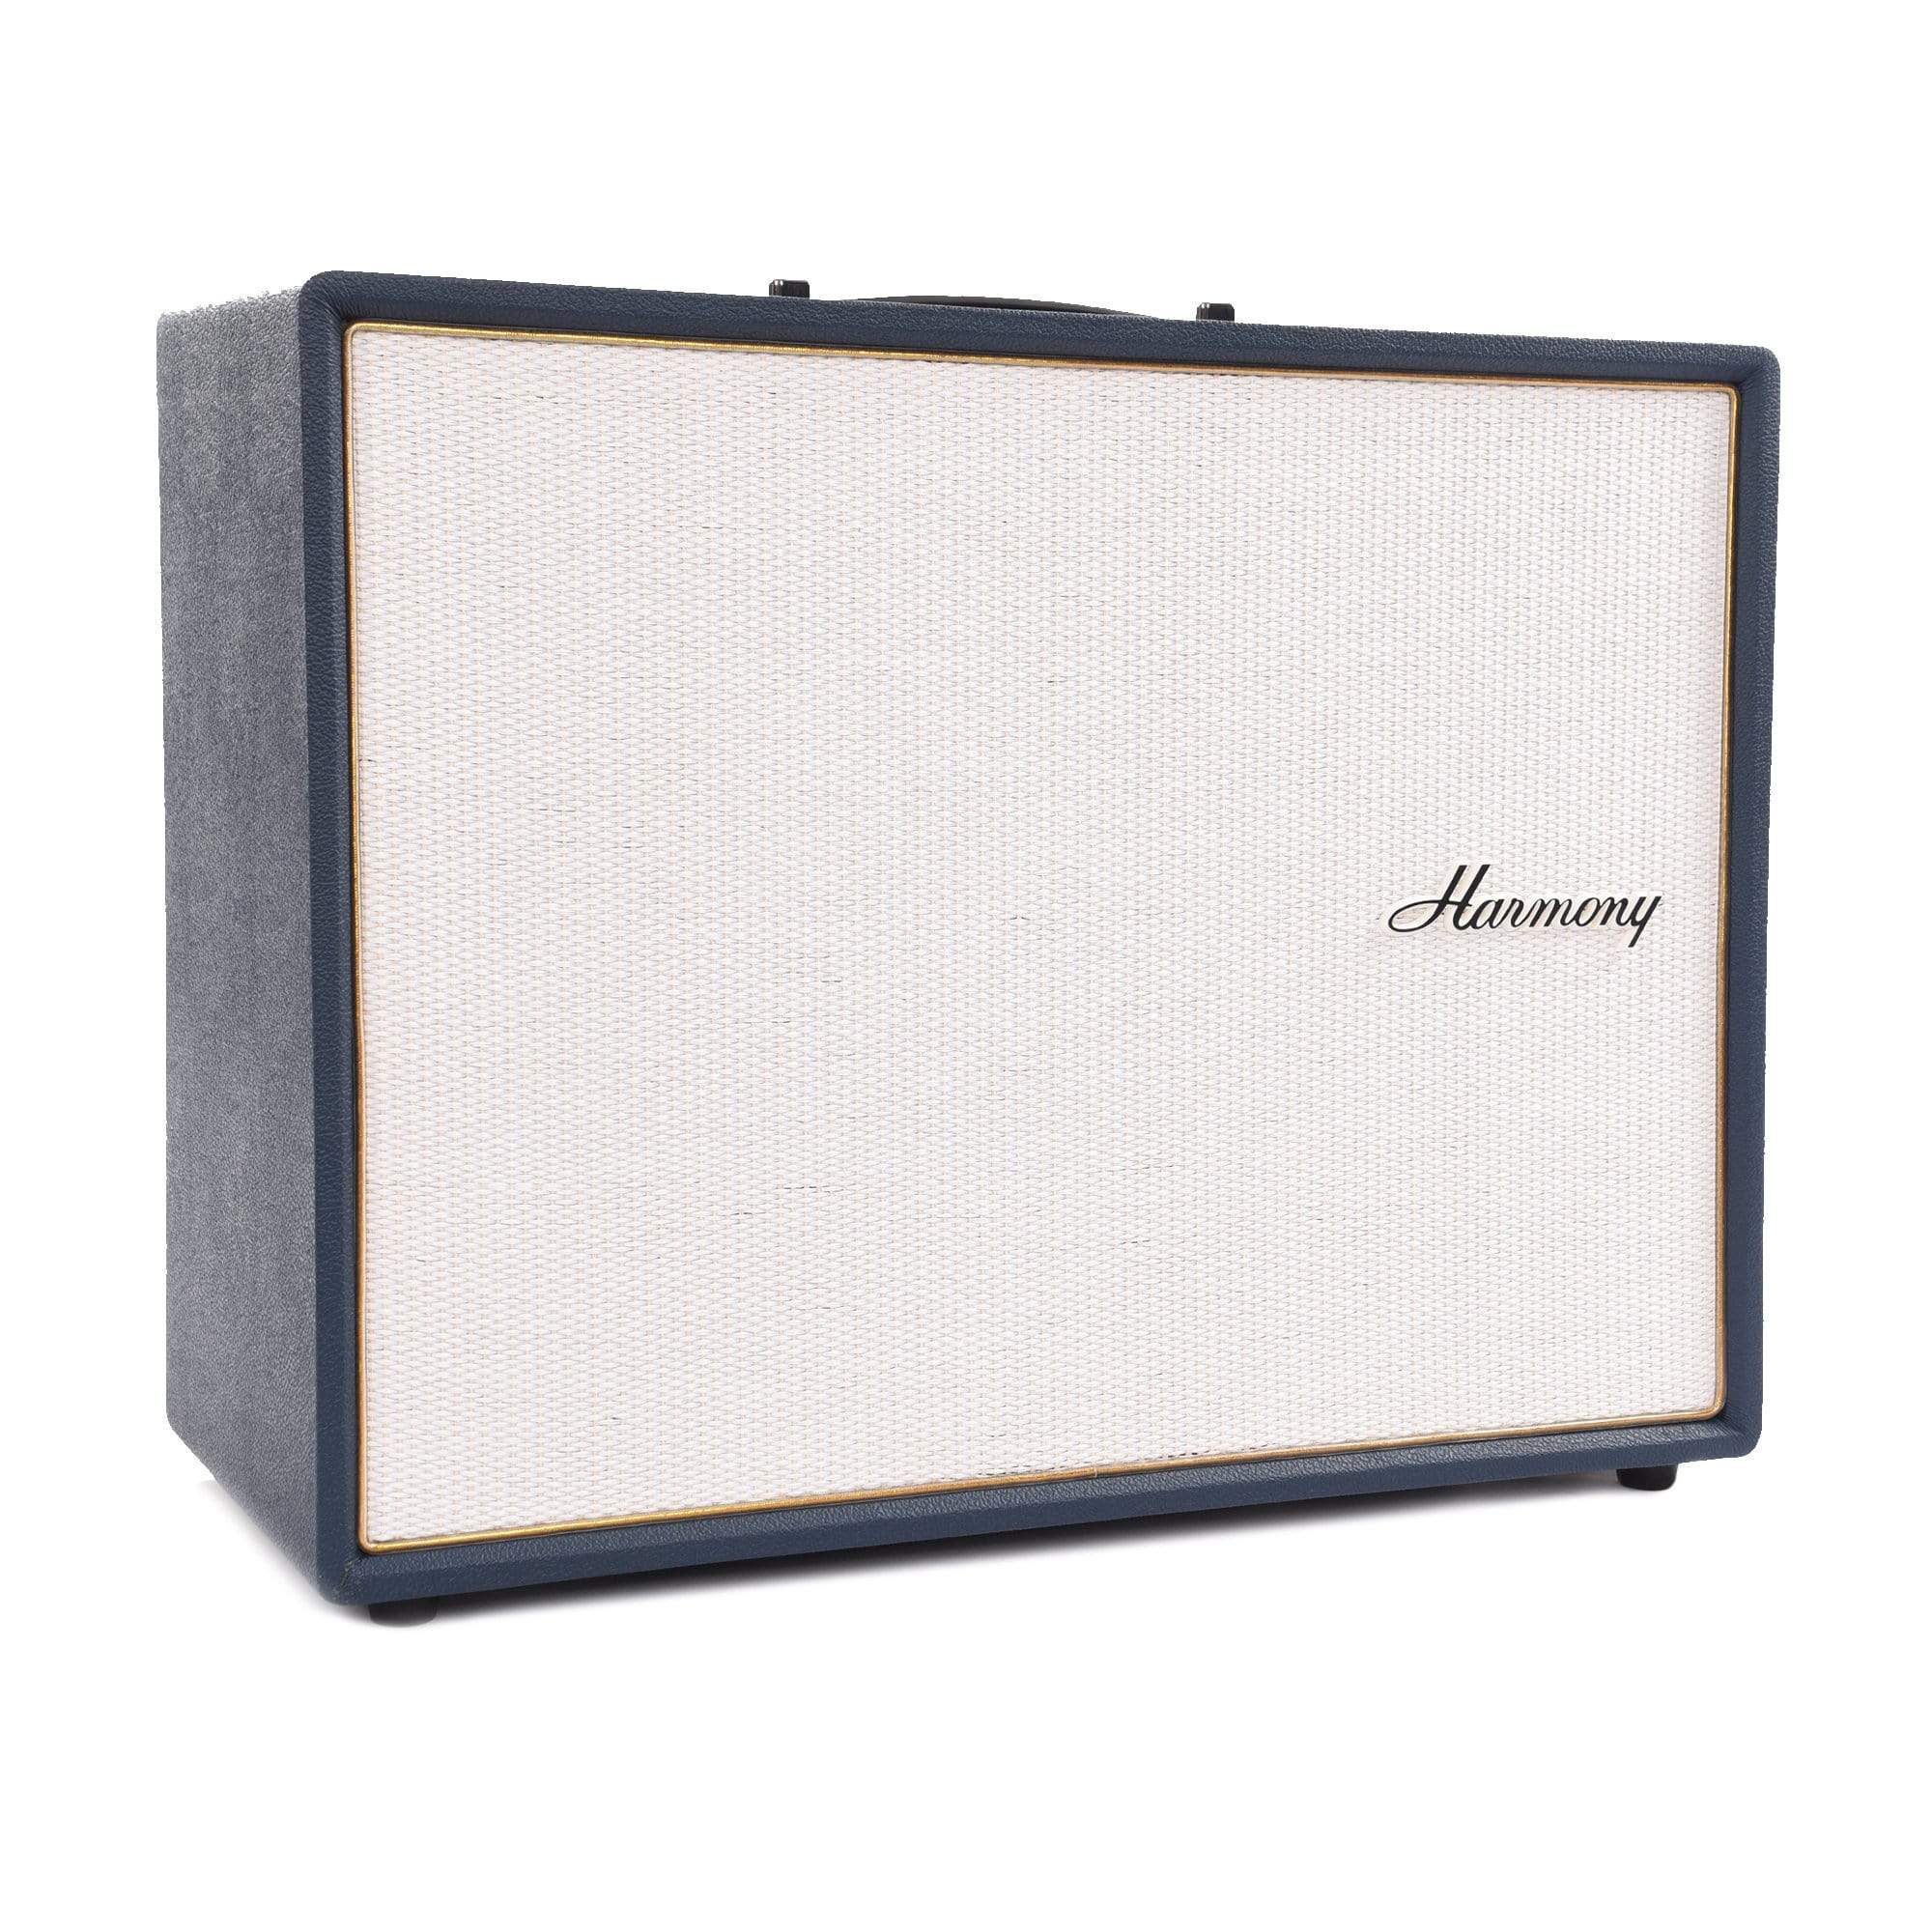 Harmony Series 6 H650 1x12 50W Combo Amp Amps / Guitar Combos